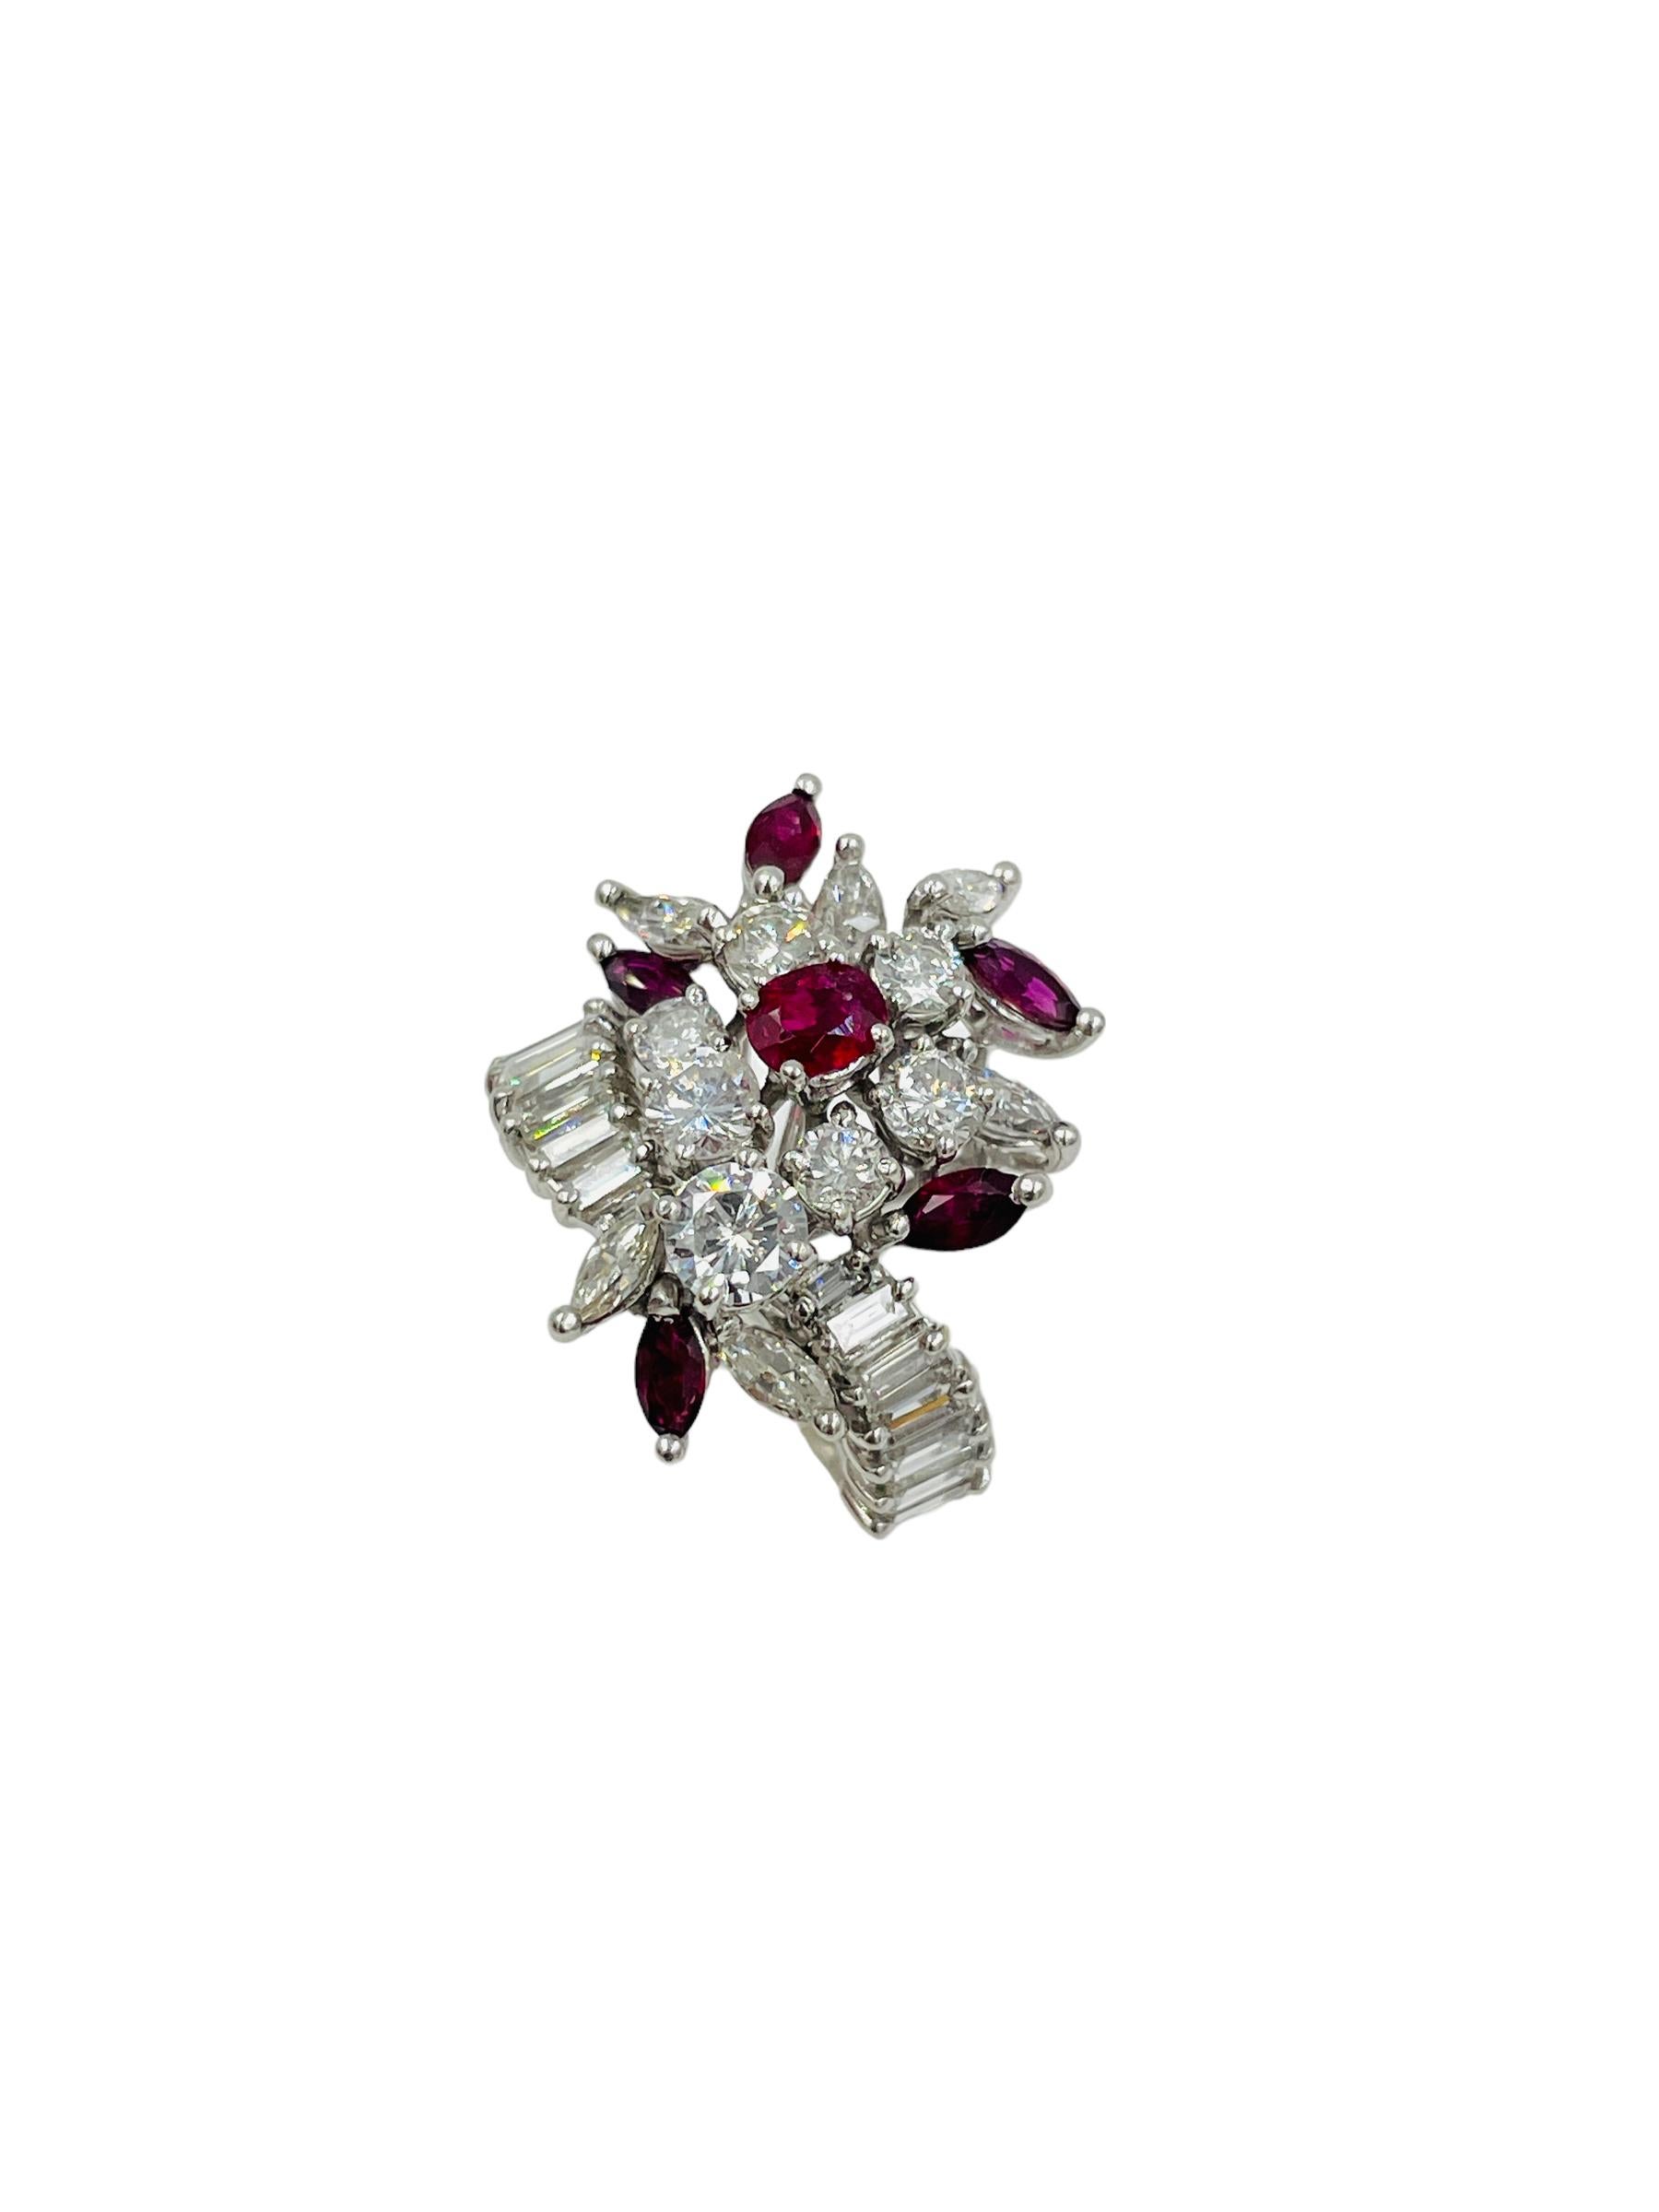 Diamond Ruby Platinum Cocktail Ring For Sale 4